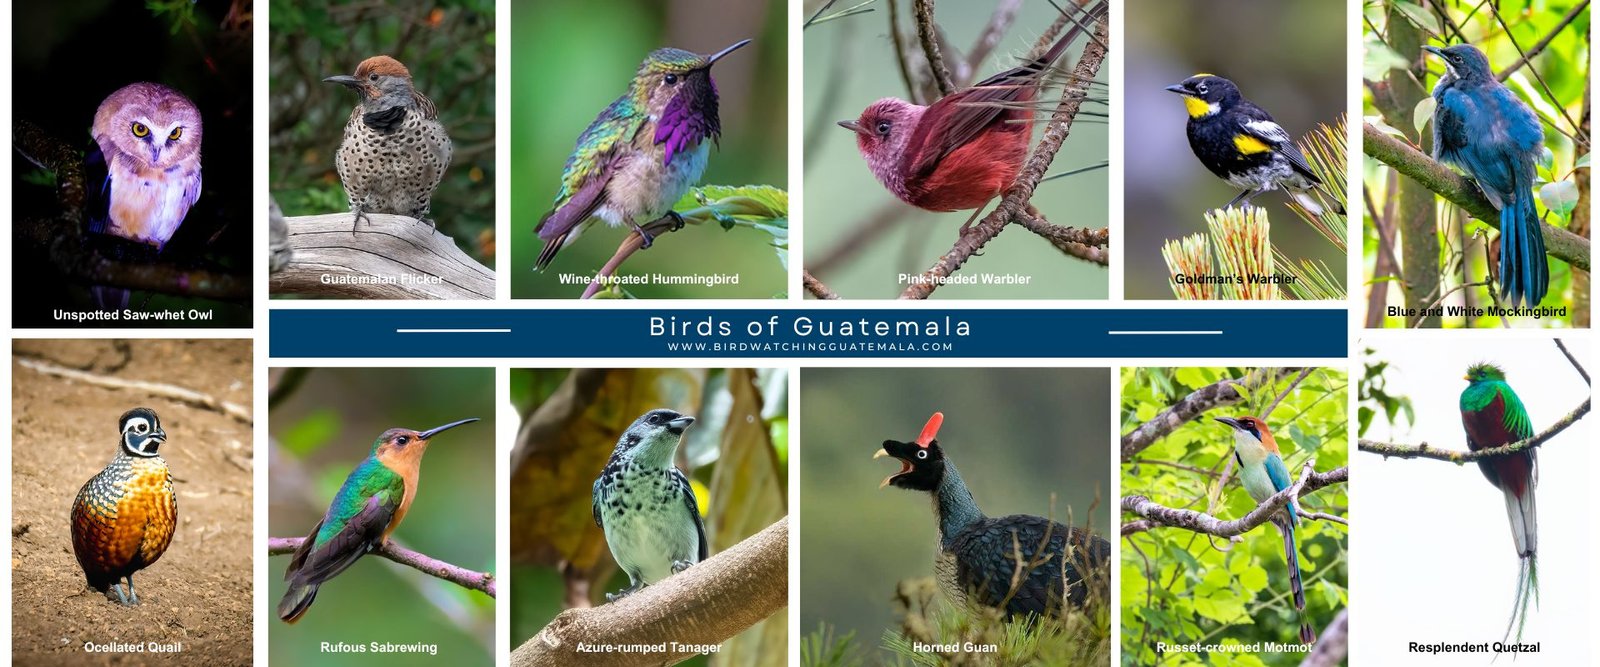 The banner image for Birds of Guatemala showcased the Resplendent Quetzal, the national bird of Guatemala, which is admired for its green and crimson feathers. The banner also features a selection of Guatemala's other renowned birds, including the uniquely colored Pink-headed Warbler, the majestic Horned Guan, the beautifully patterned Azure-rumped Tanager, the swift Belted Flycatcher, the locally endemic Goldman's Warbler, and the dazzling Wine-throated Hummingbird among other. These birds are depicted against the backdrop of Guatemala's diverse habitats, highlighting the nation's exceptional avian diversity.